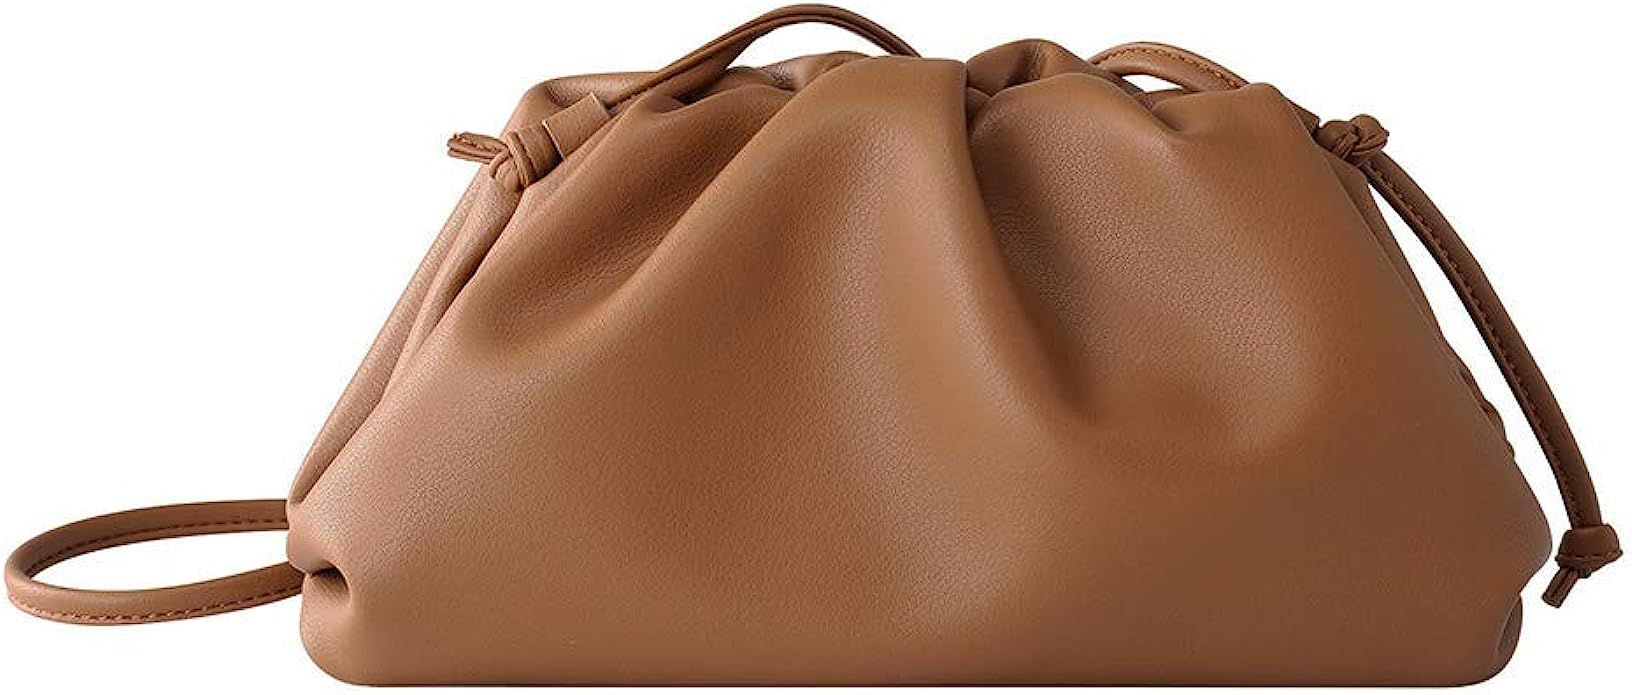 Dumpling Cloud Clutch Purses for Women Crossbody Bags Genuine Leather with Ruched Detail | Amazon (US)